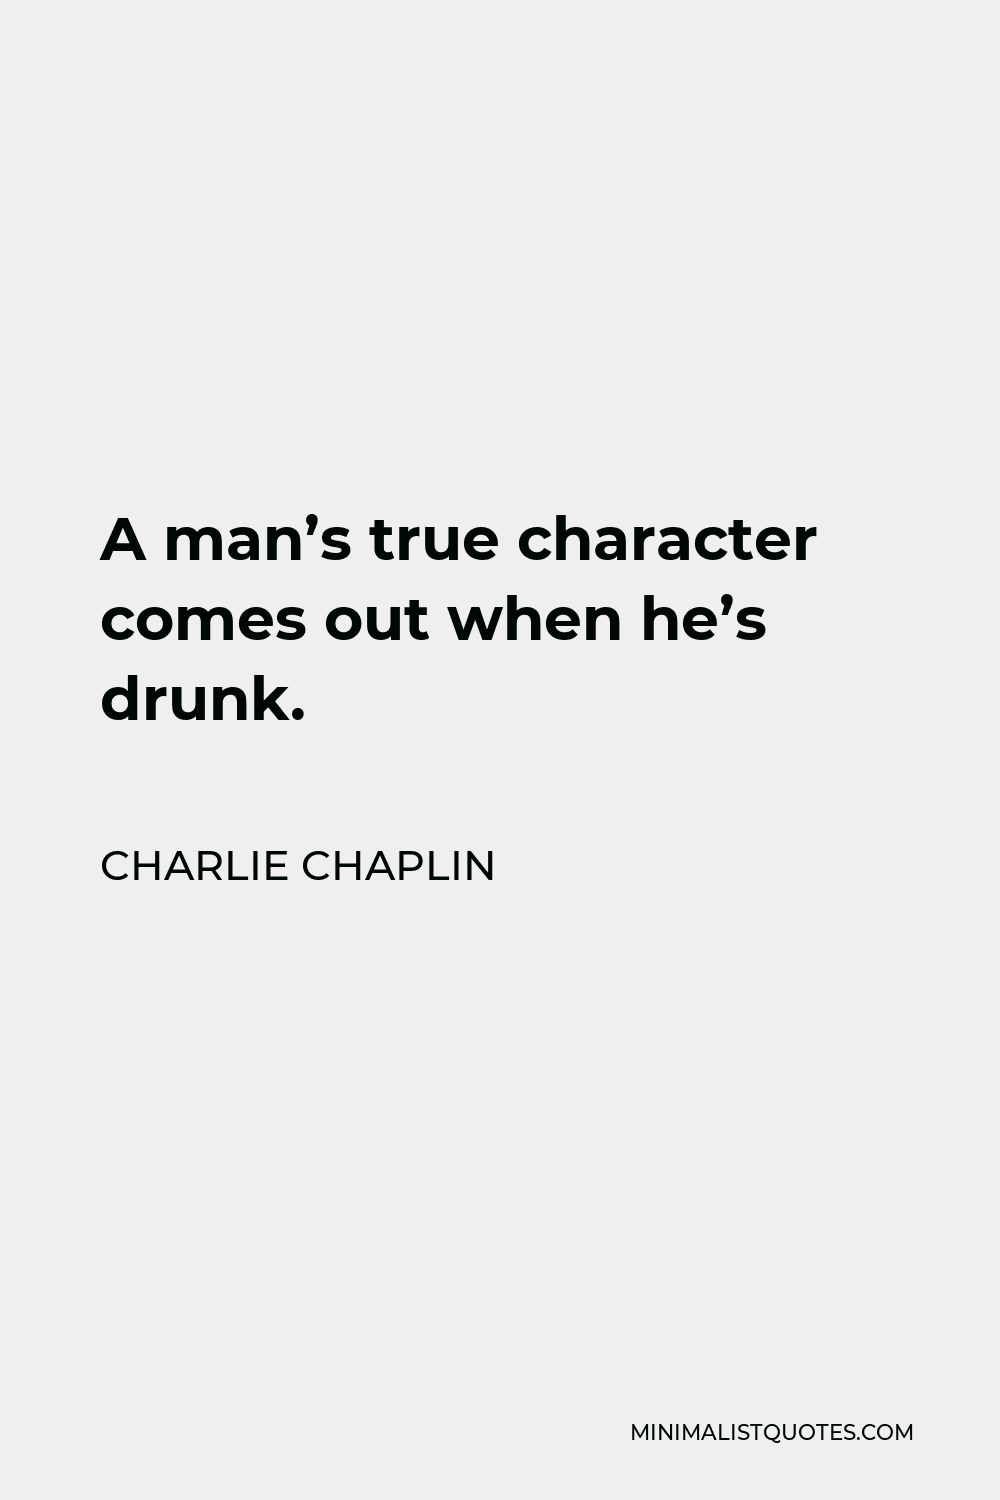 Charlie Chaplin Quote A Mans True Character Comes Out When Hes Drunk